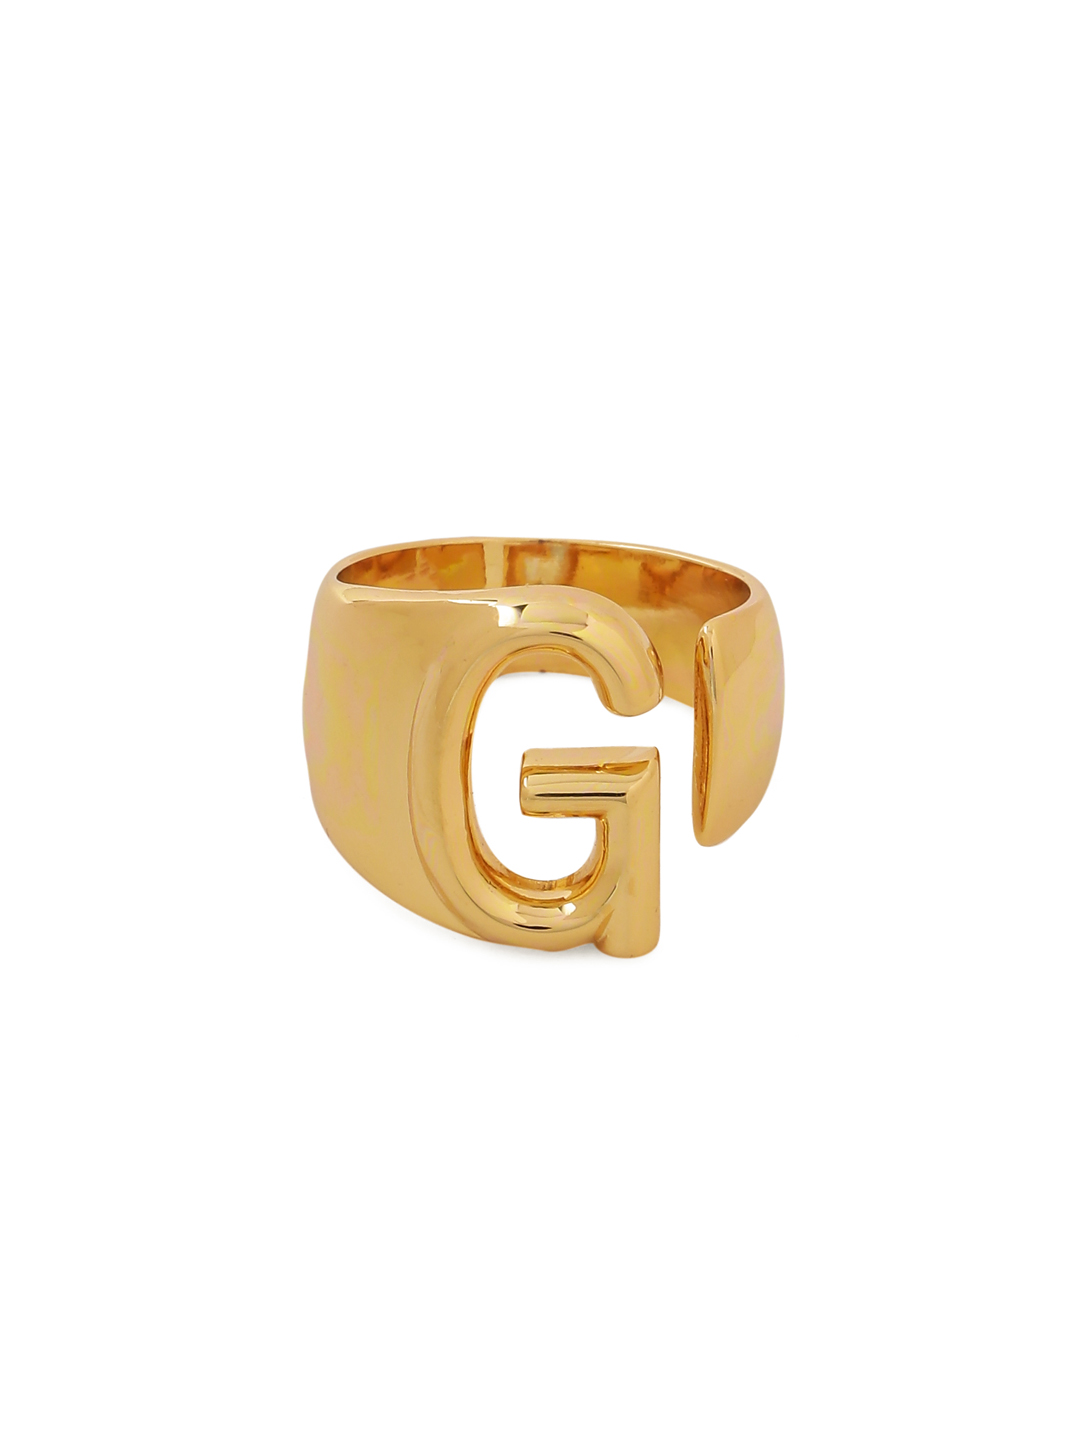 WUGDSQGH Ring For Women Letter G Gold Adjustable Color Rhinestones Az Letter  A Kgrz Ring Rings Women Men Initial Gold Punk Personality Diamond Style  Signet Ring Party Gift Couple Rings : Amazon.co.uk: